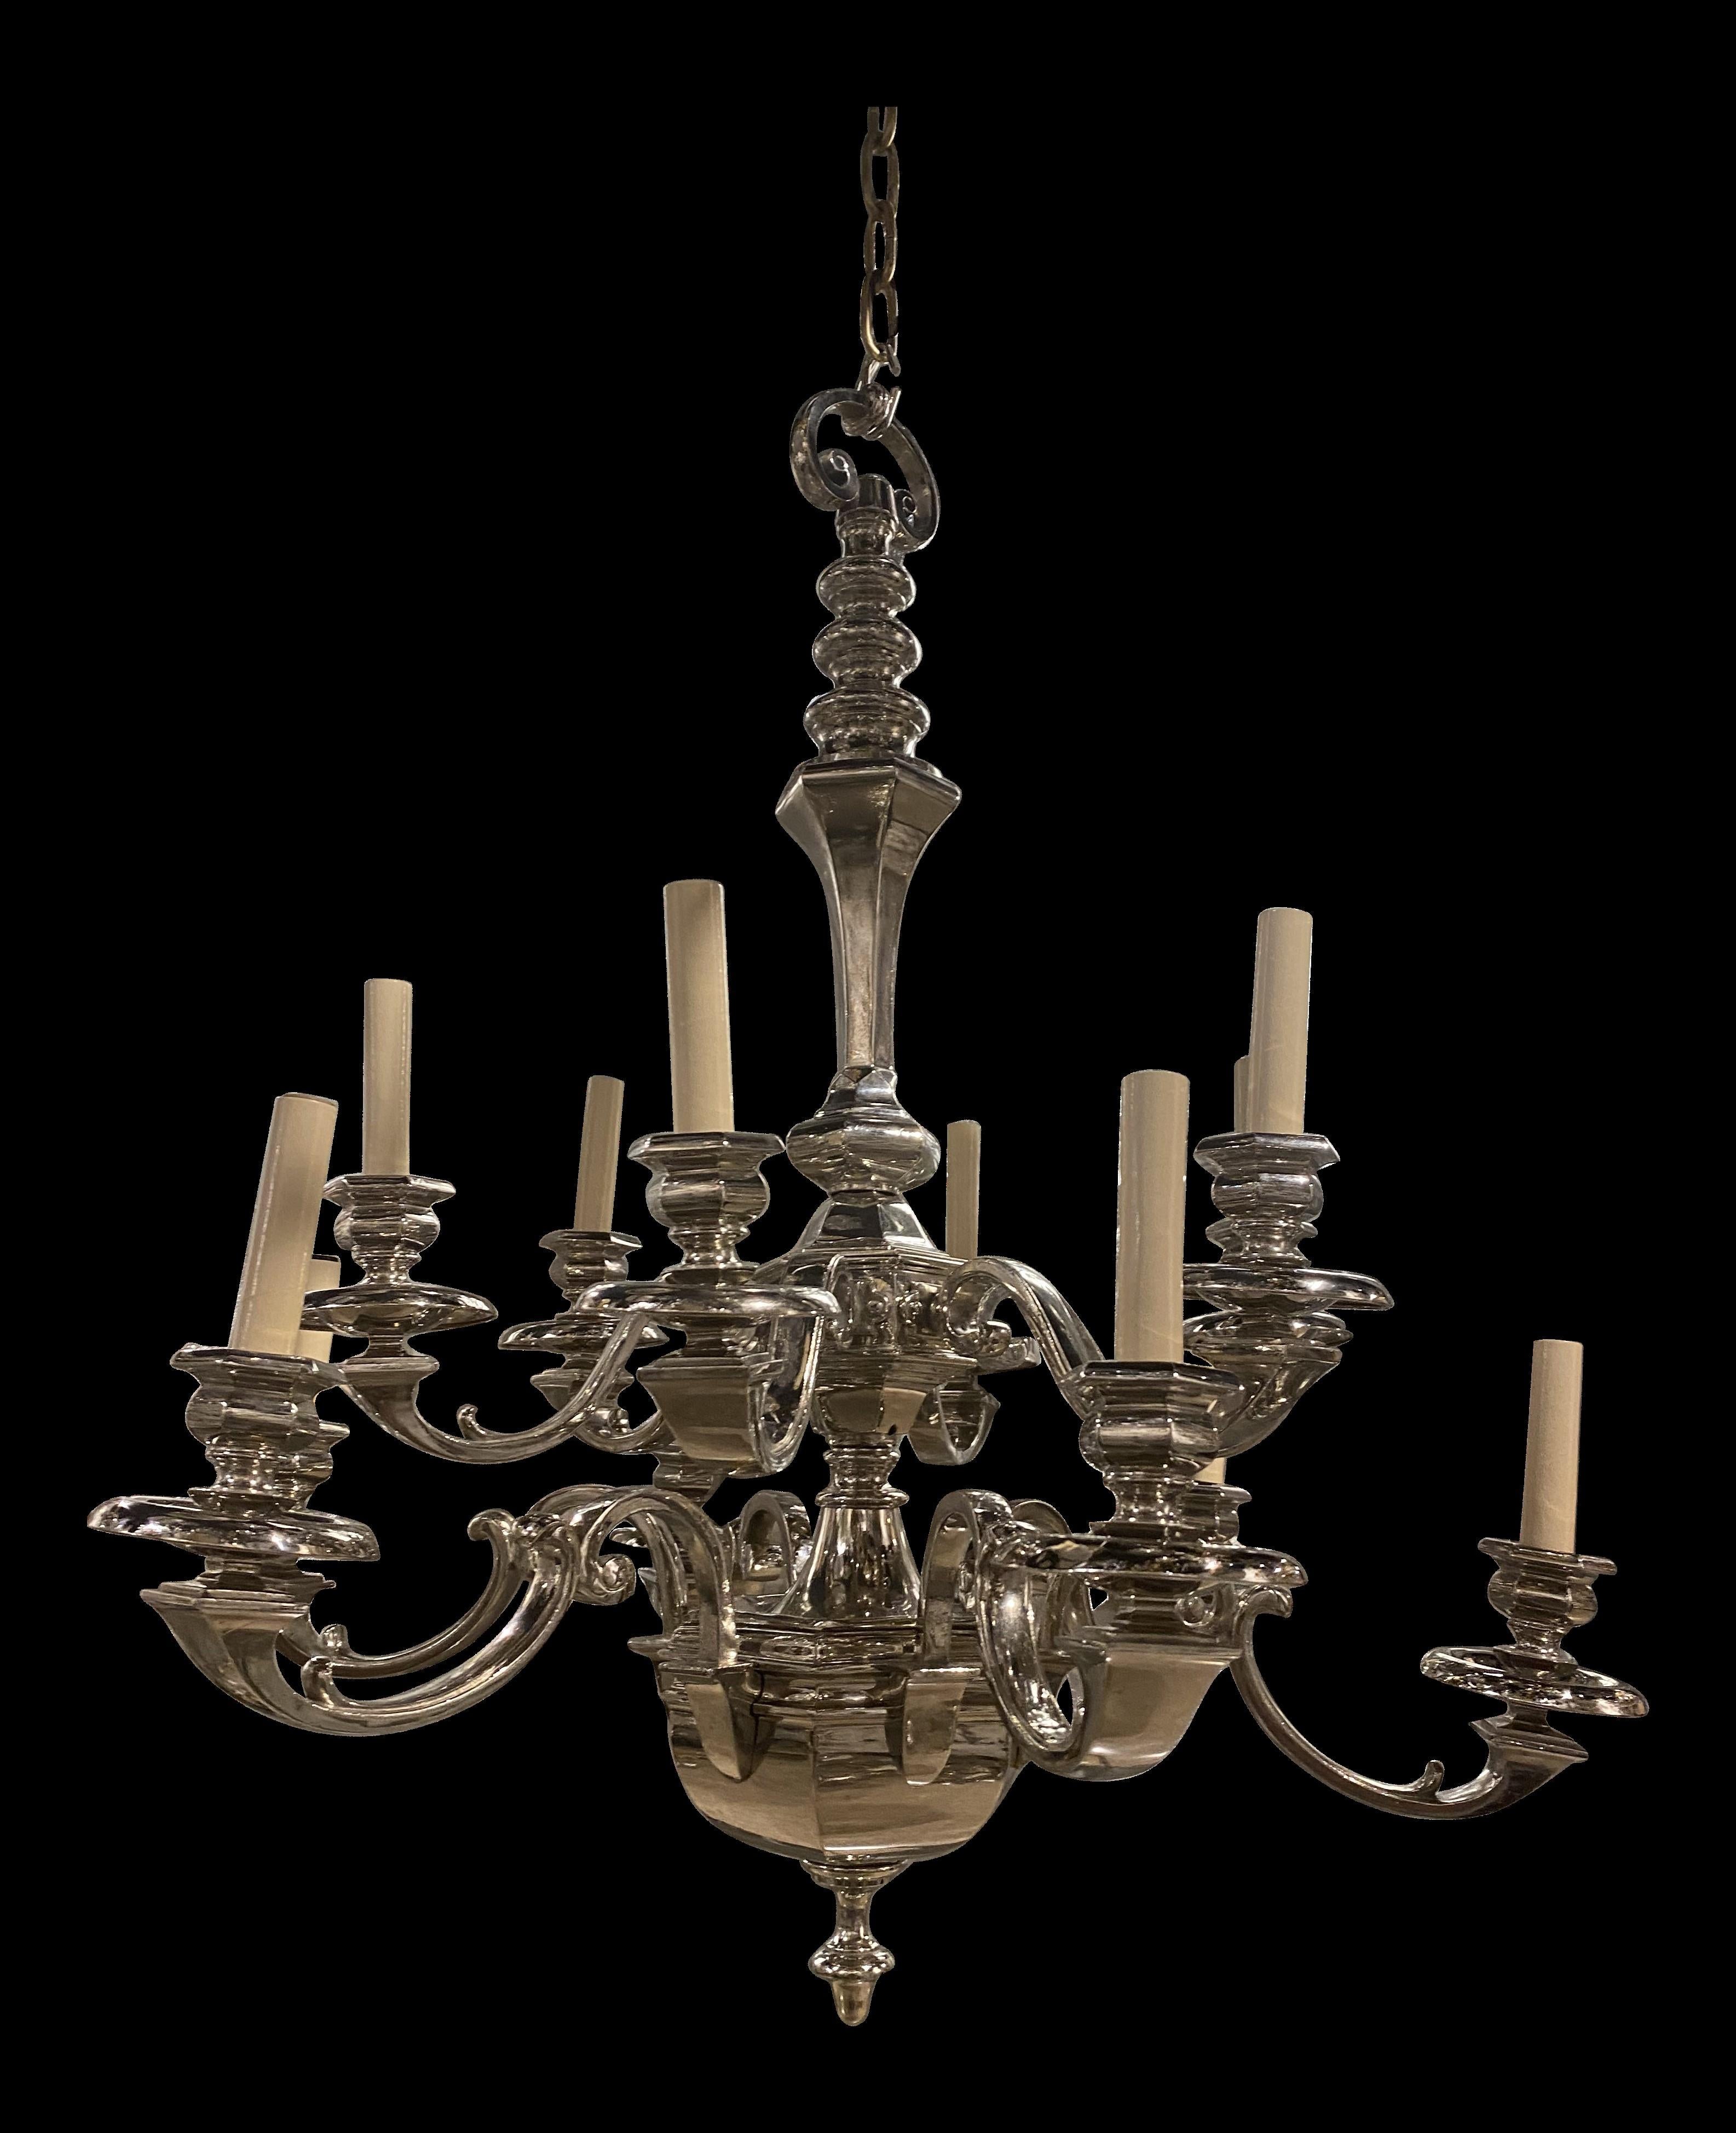 A circa 1940's Italian silver plated double tier chandelier with 12 lights